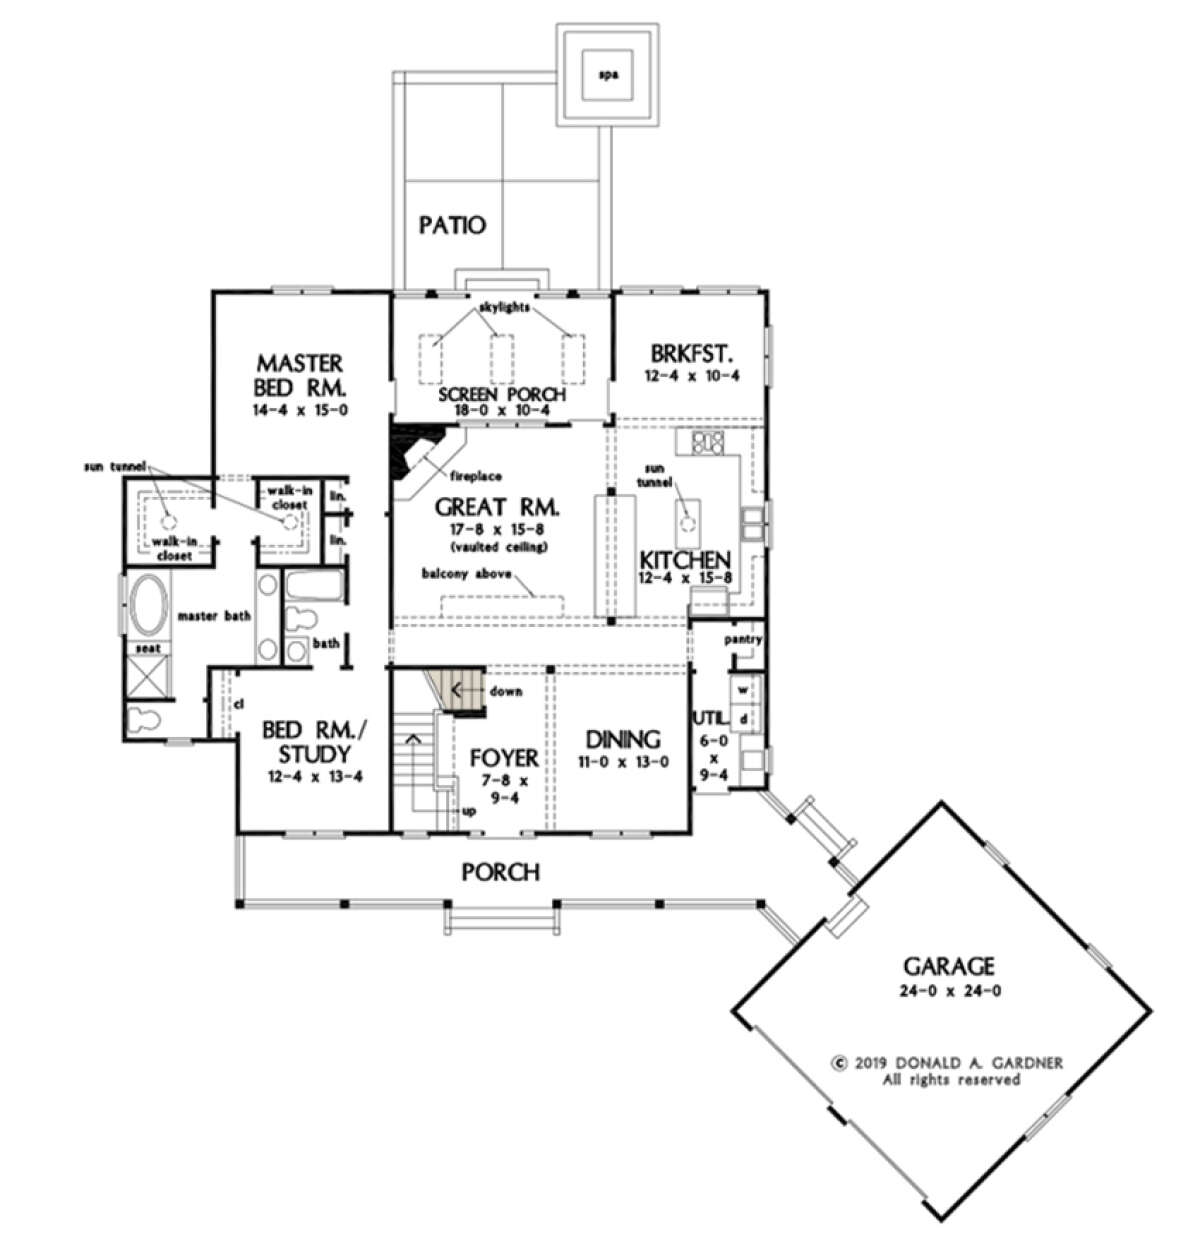 Main Floor w/ Basement Stair Location for House Plan #2865-00106